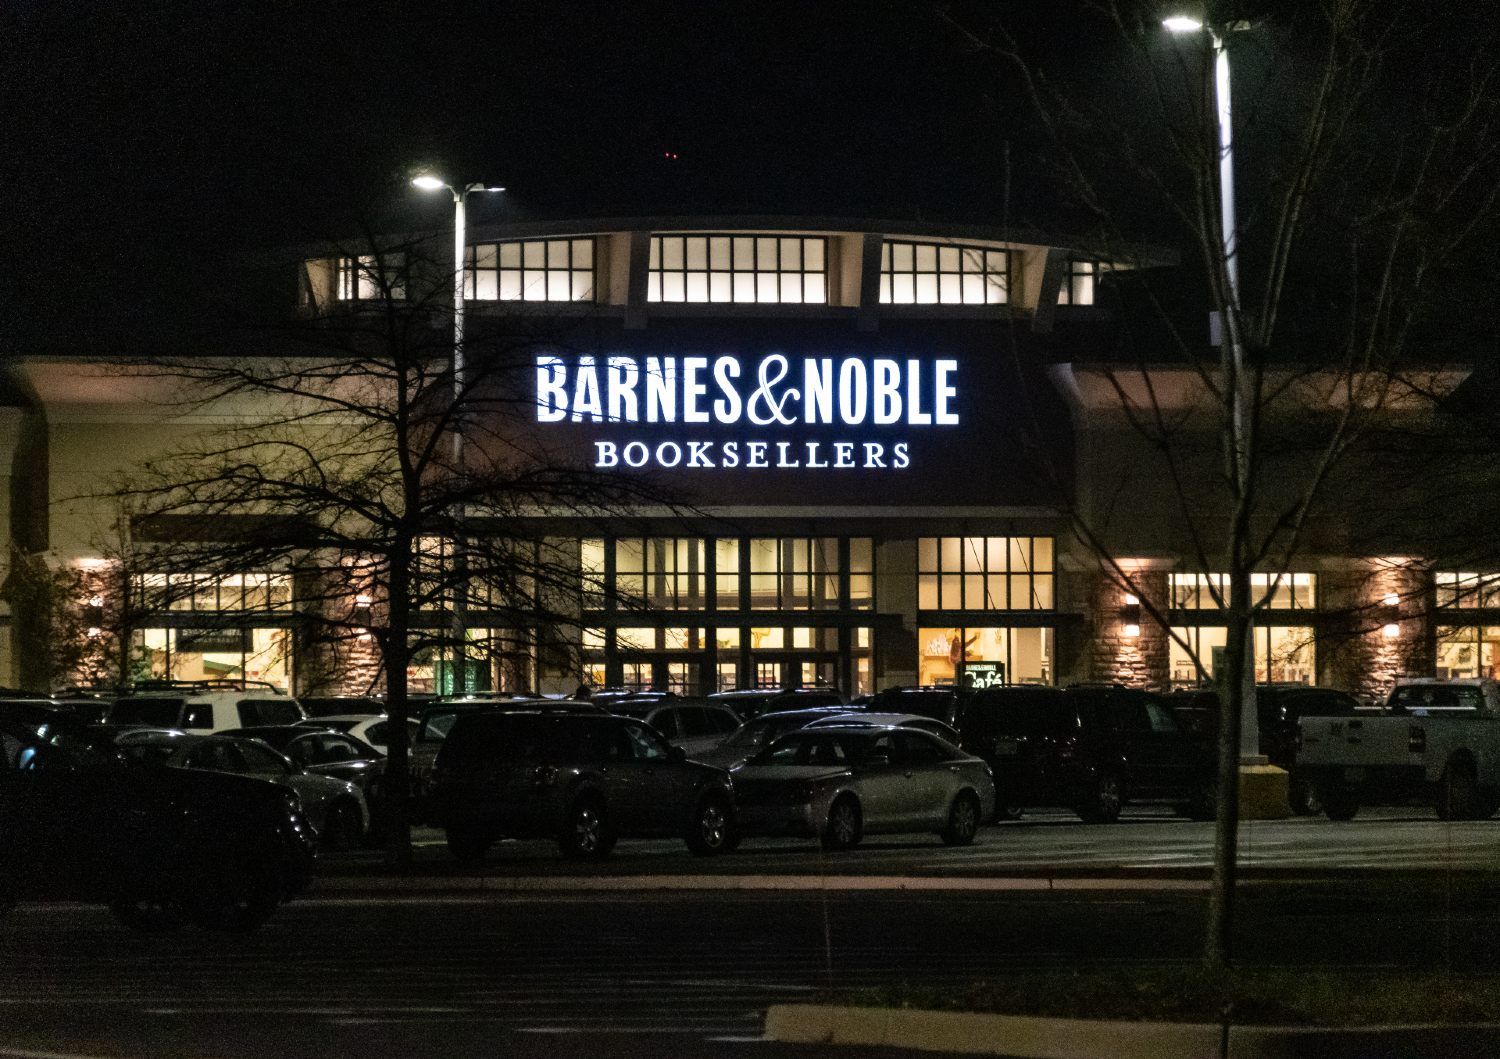 Barnes & Noble storefront at night - data breach